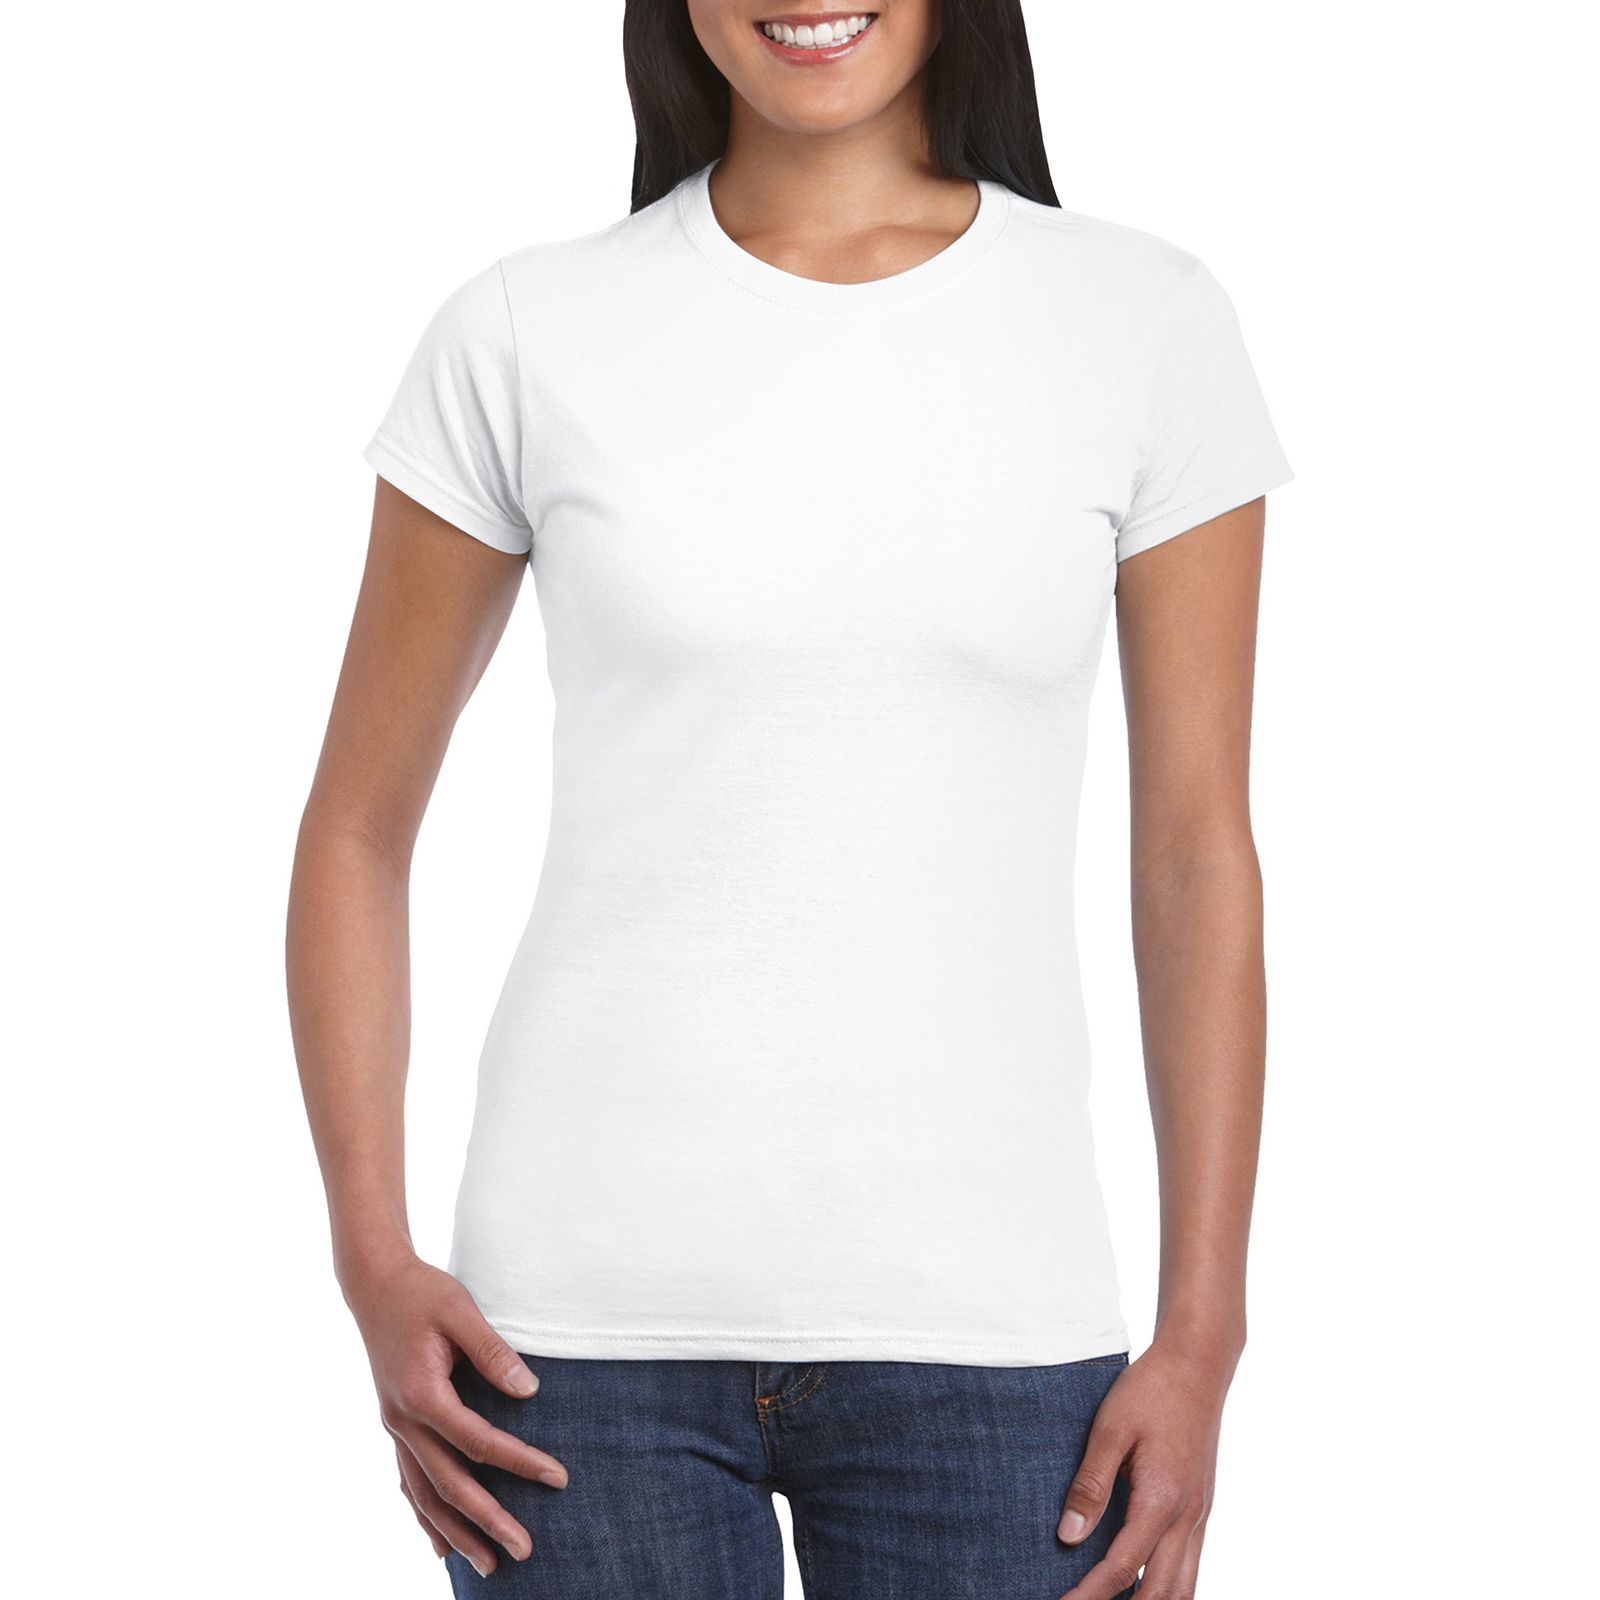 Women's T-shirt SoftStyle 153 with your LOGO